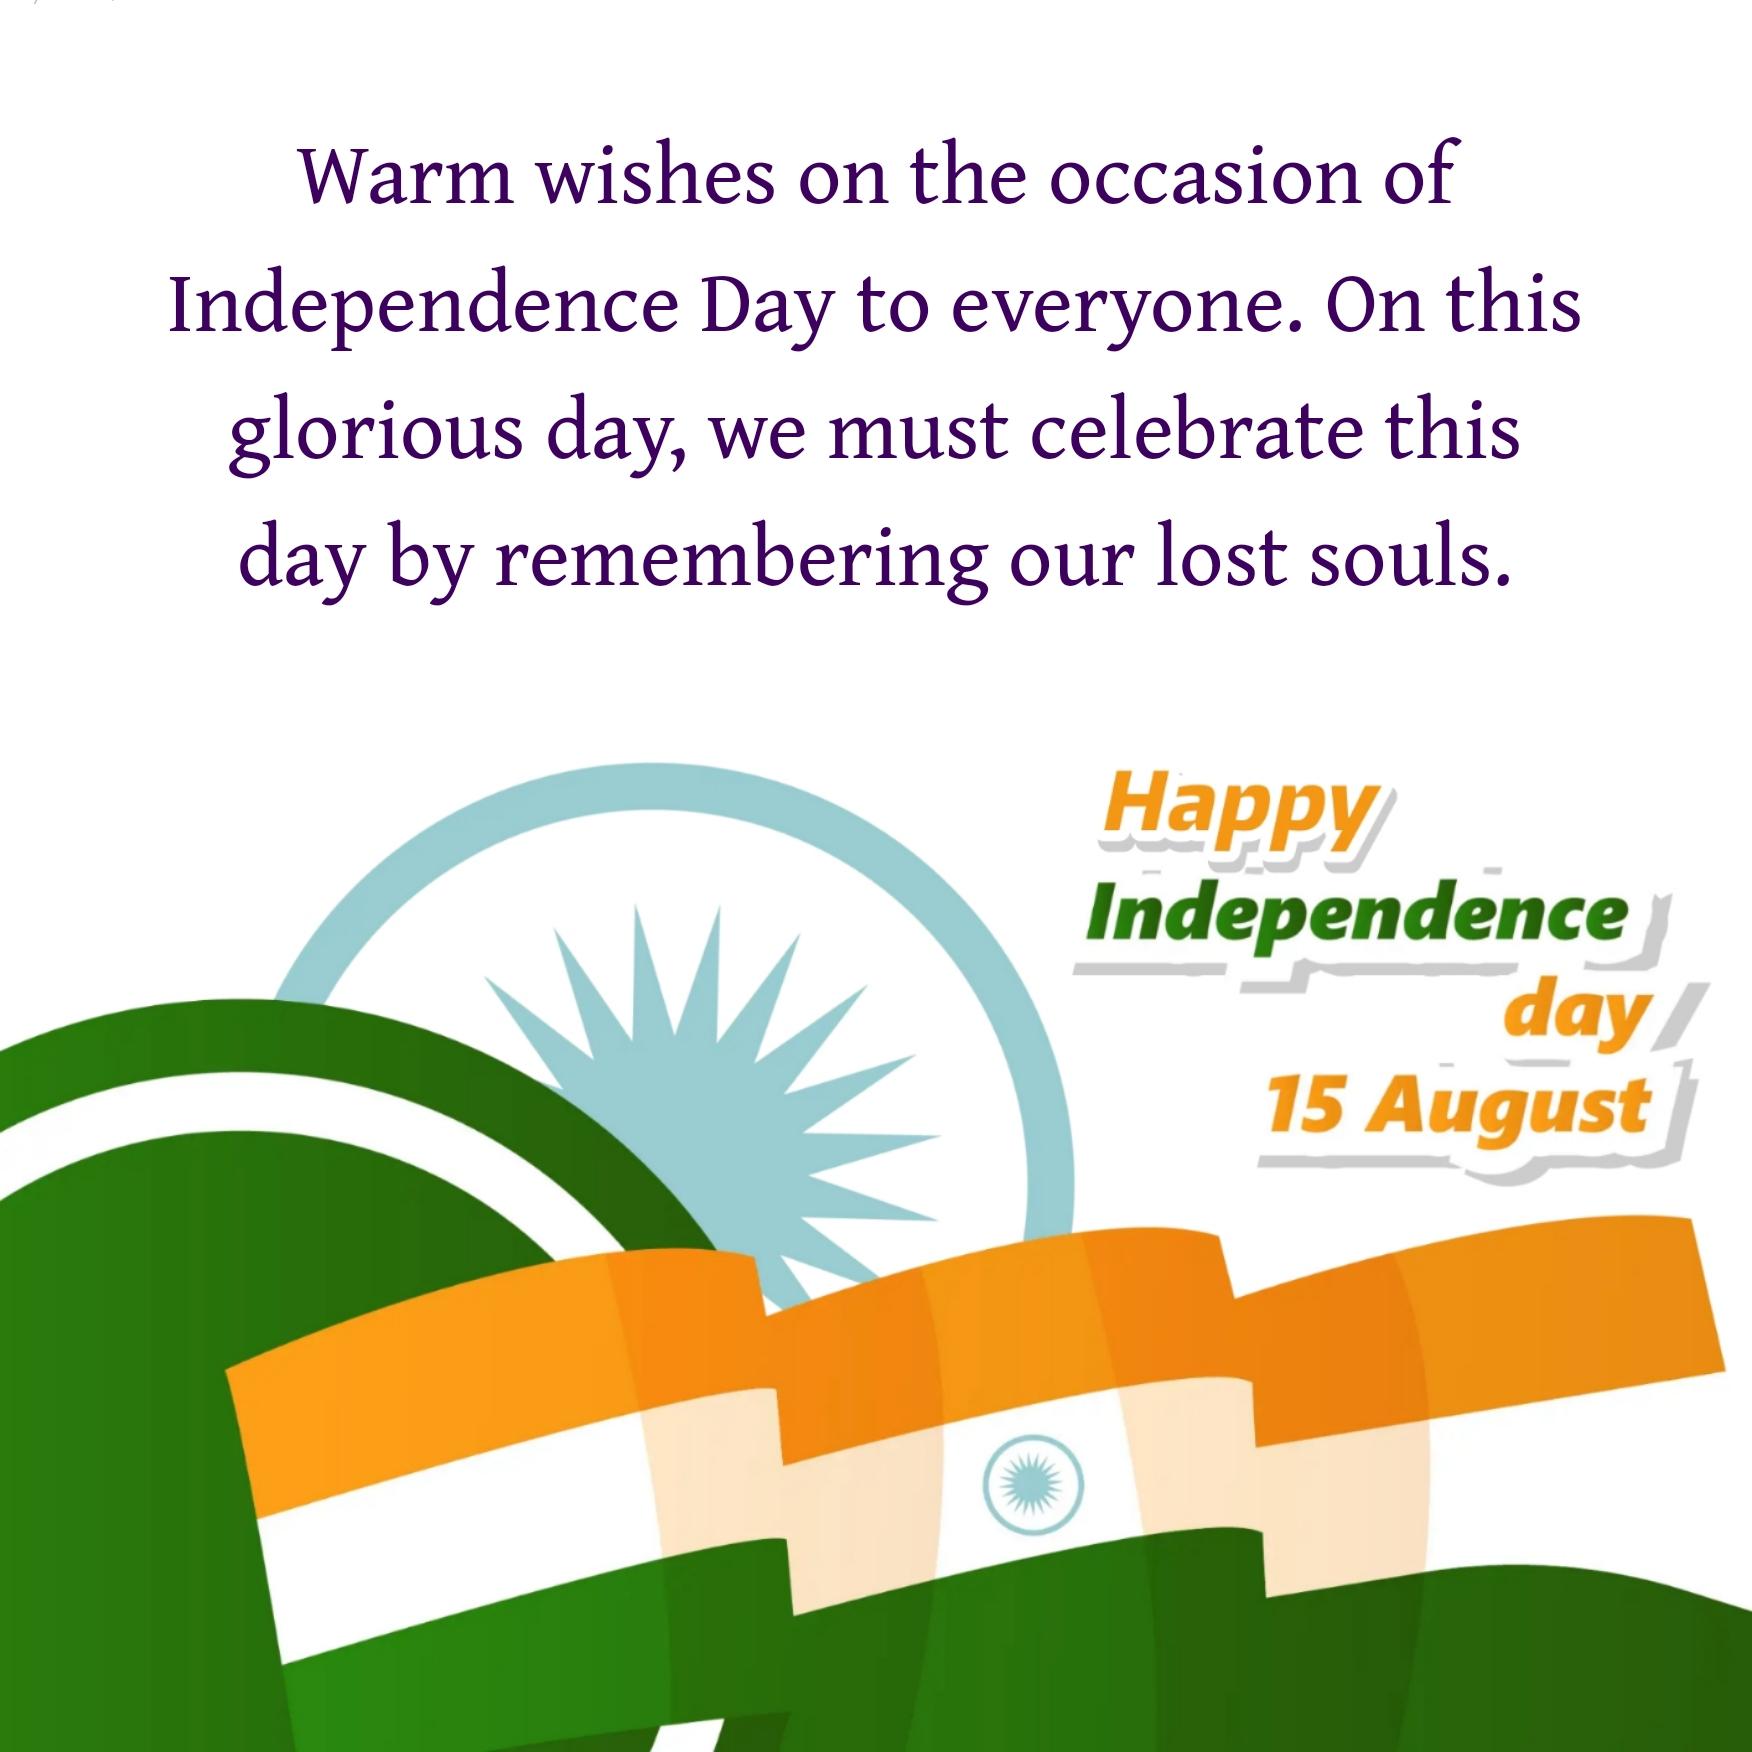 Warm wishes on the occasion of Independence Day to everyone